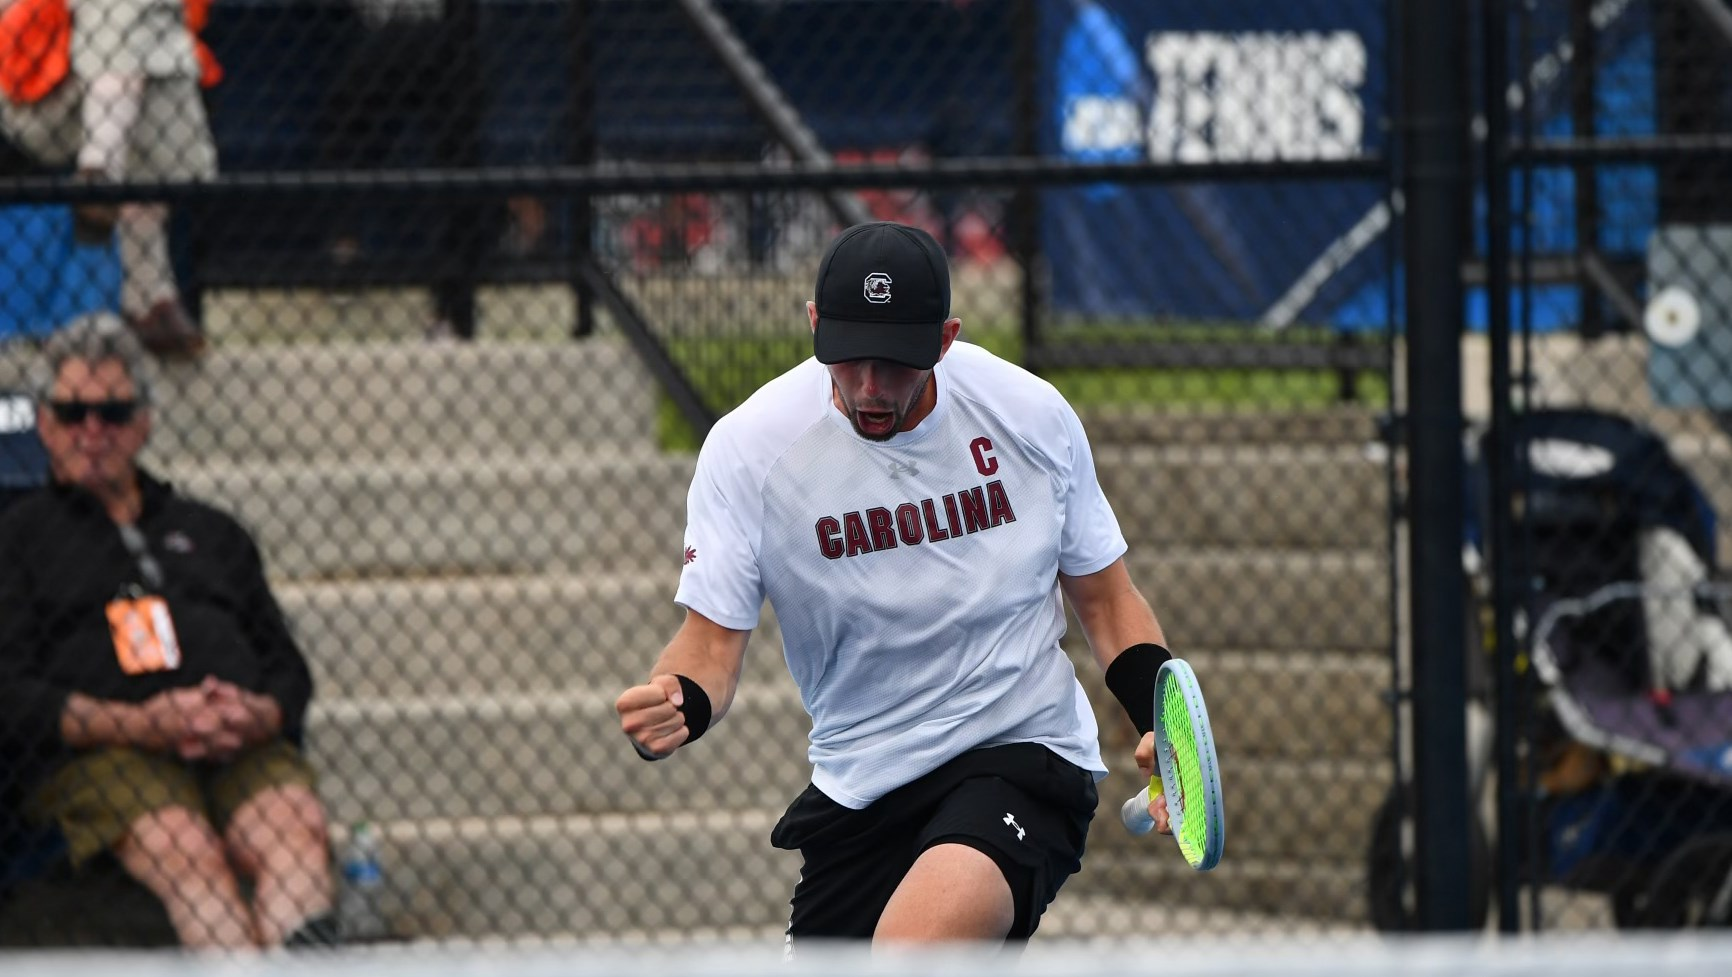 Gamecocks’ Singles, Doubles Entries Advance to Round of 16